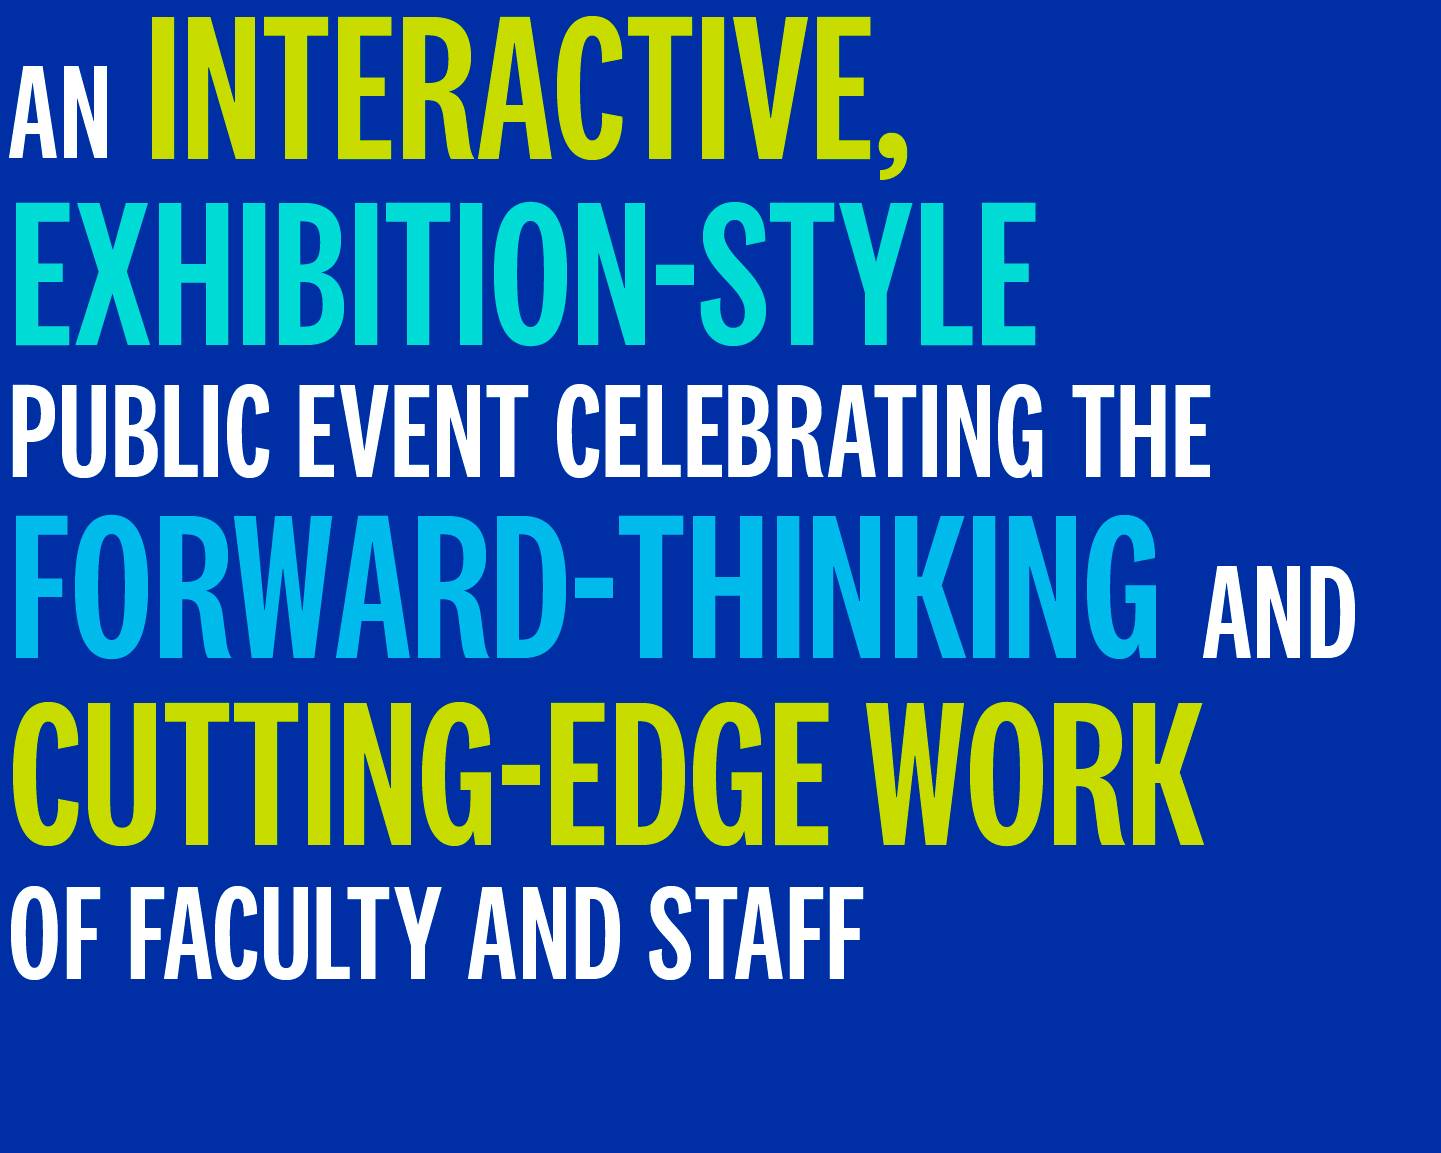 An interactive, exhibition-style public event celebrating the forward-thinking and cutting-edge work of faculty and staff